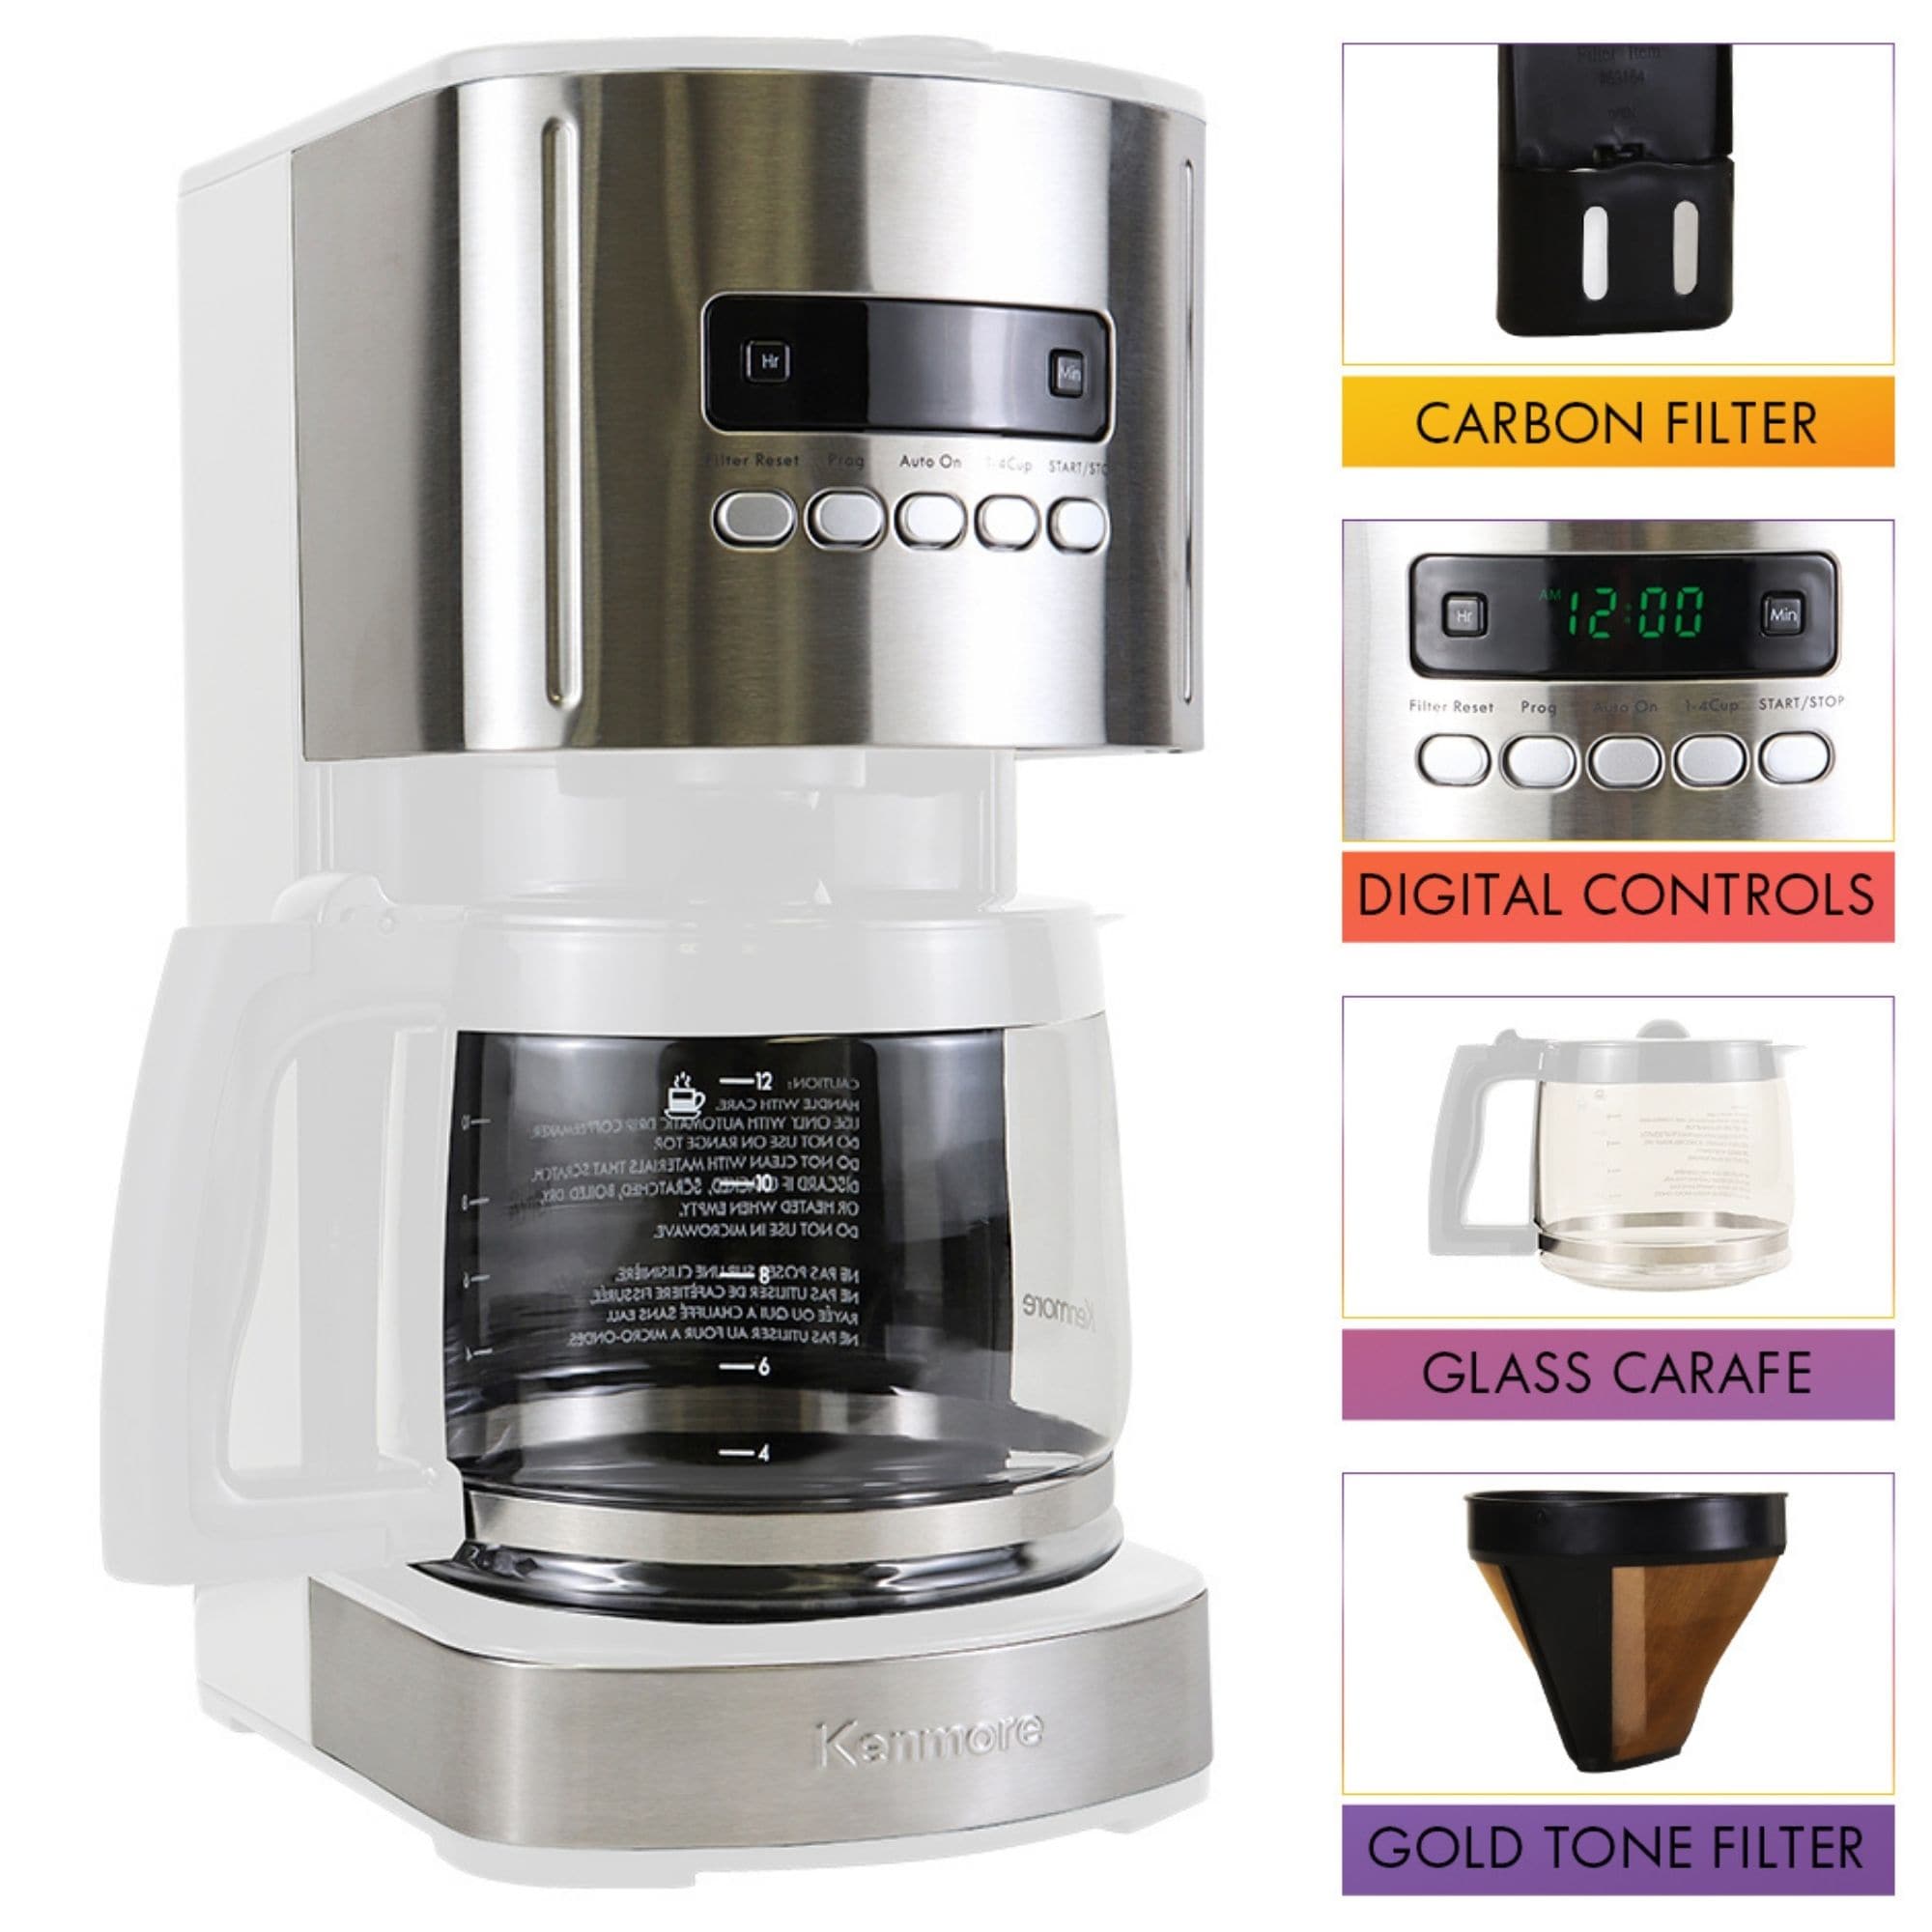 Elite Gourmet Americana Collection 5 Cup Carafe Coffee Maker